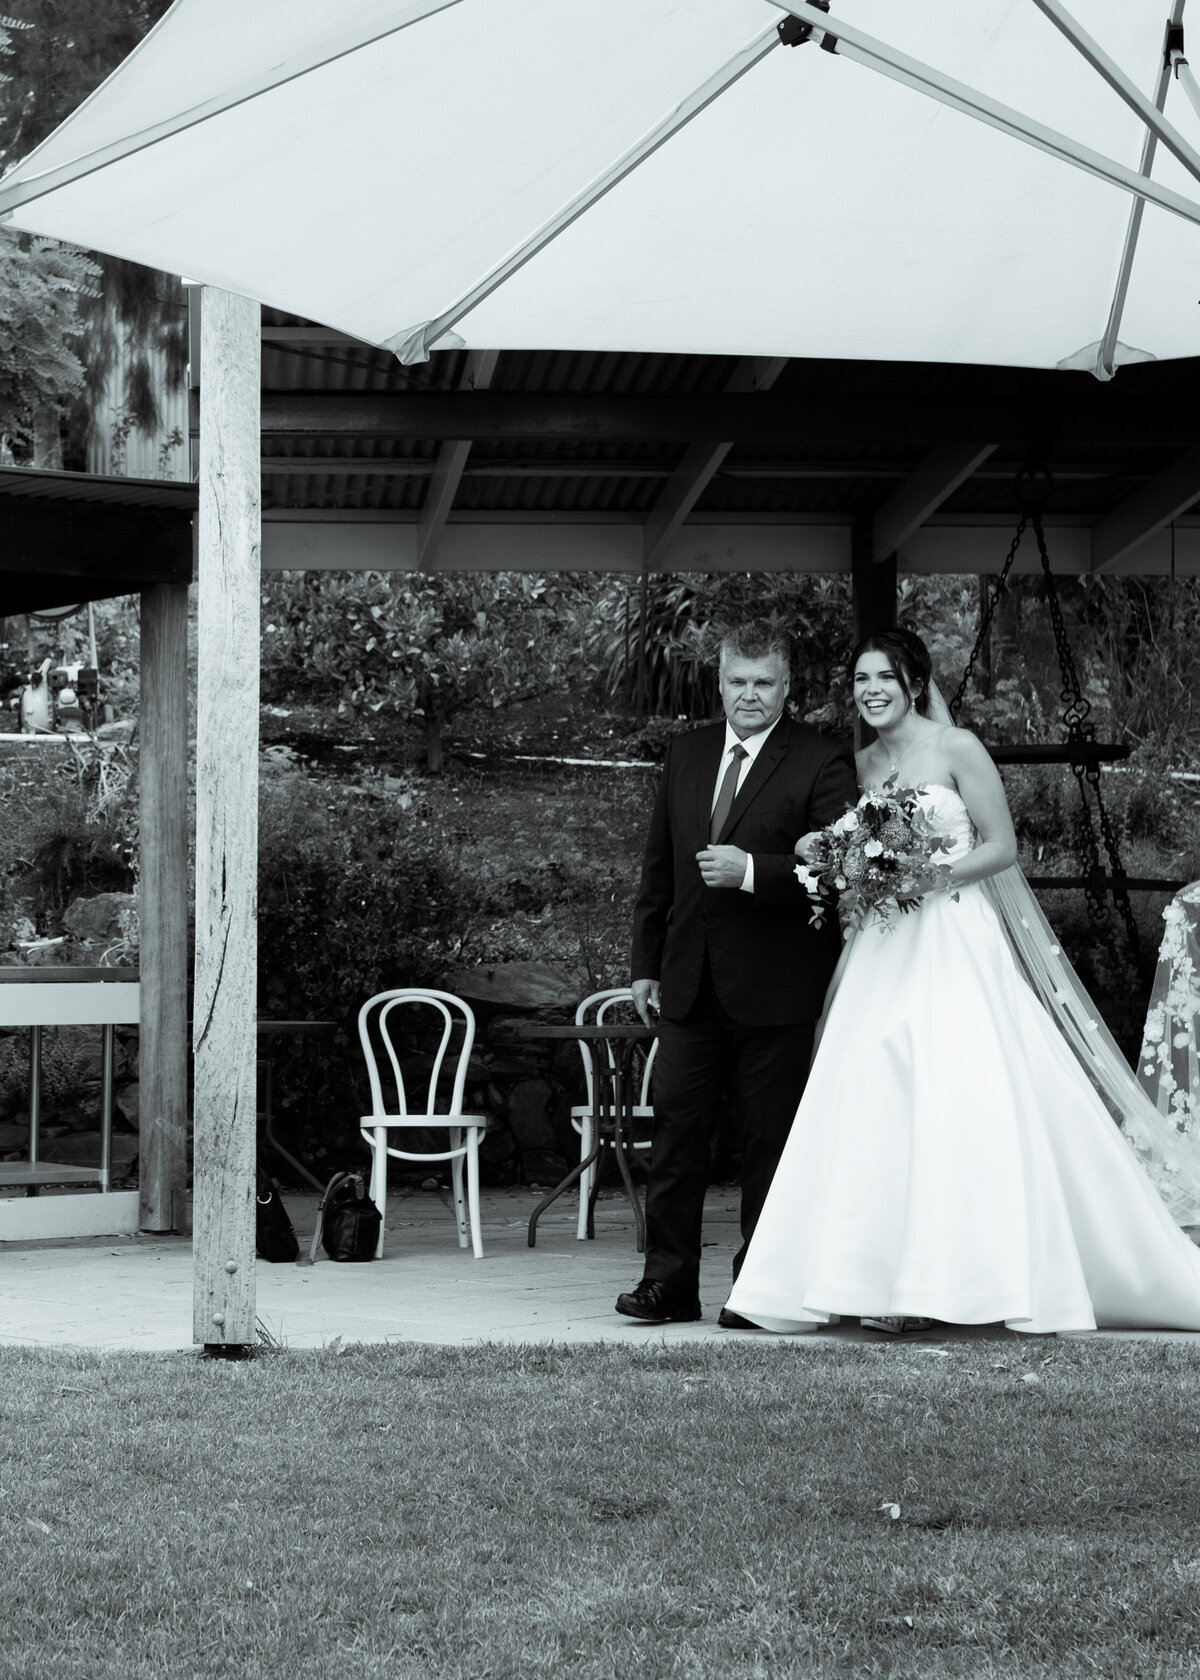 M&R-Anderson-Hill-Rexvil-Photography-Adelaide-Wedding-Photographer-349